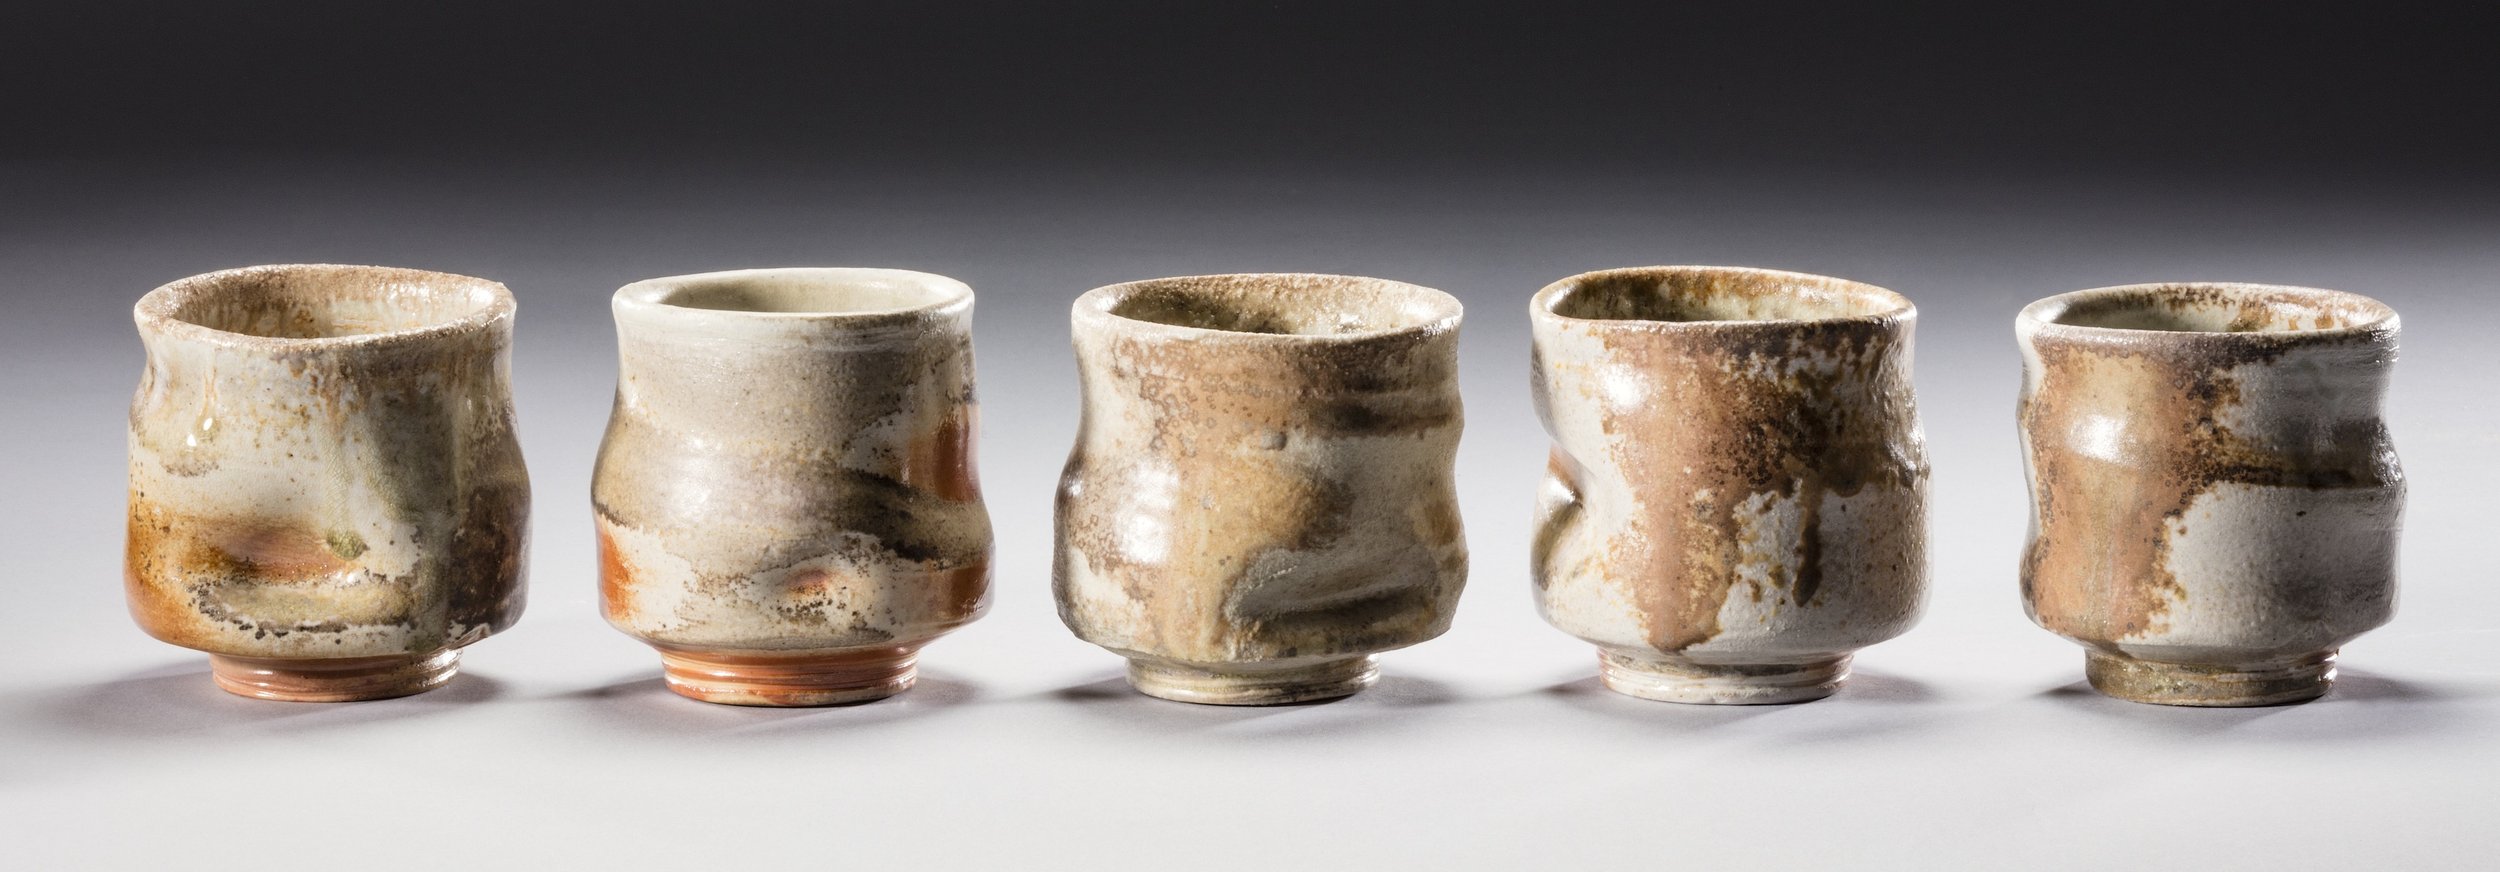    Cups  , ~3"H x 3"W each, wood fired porcelain 